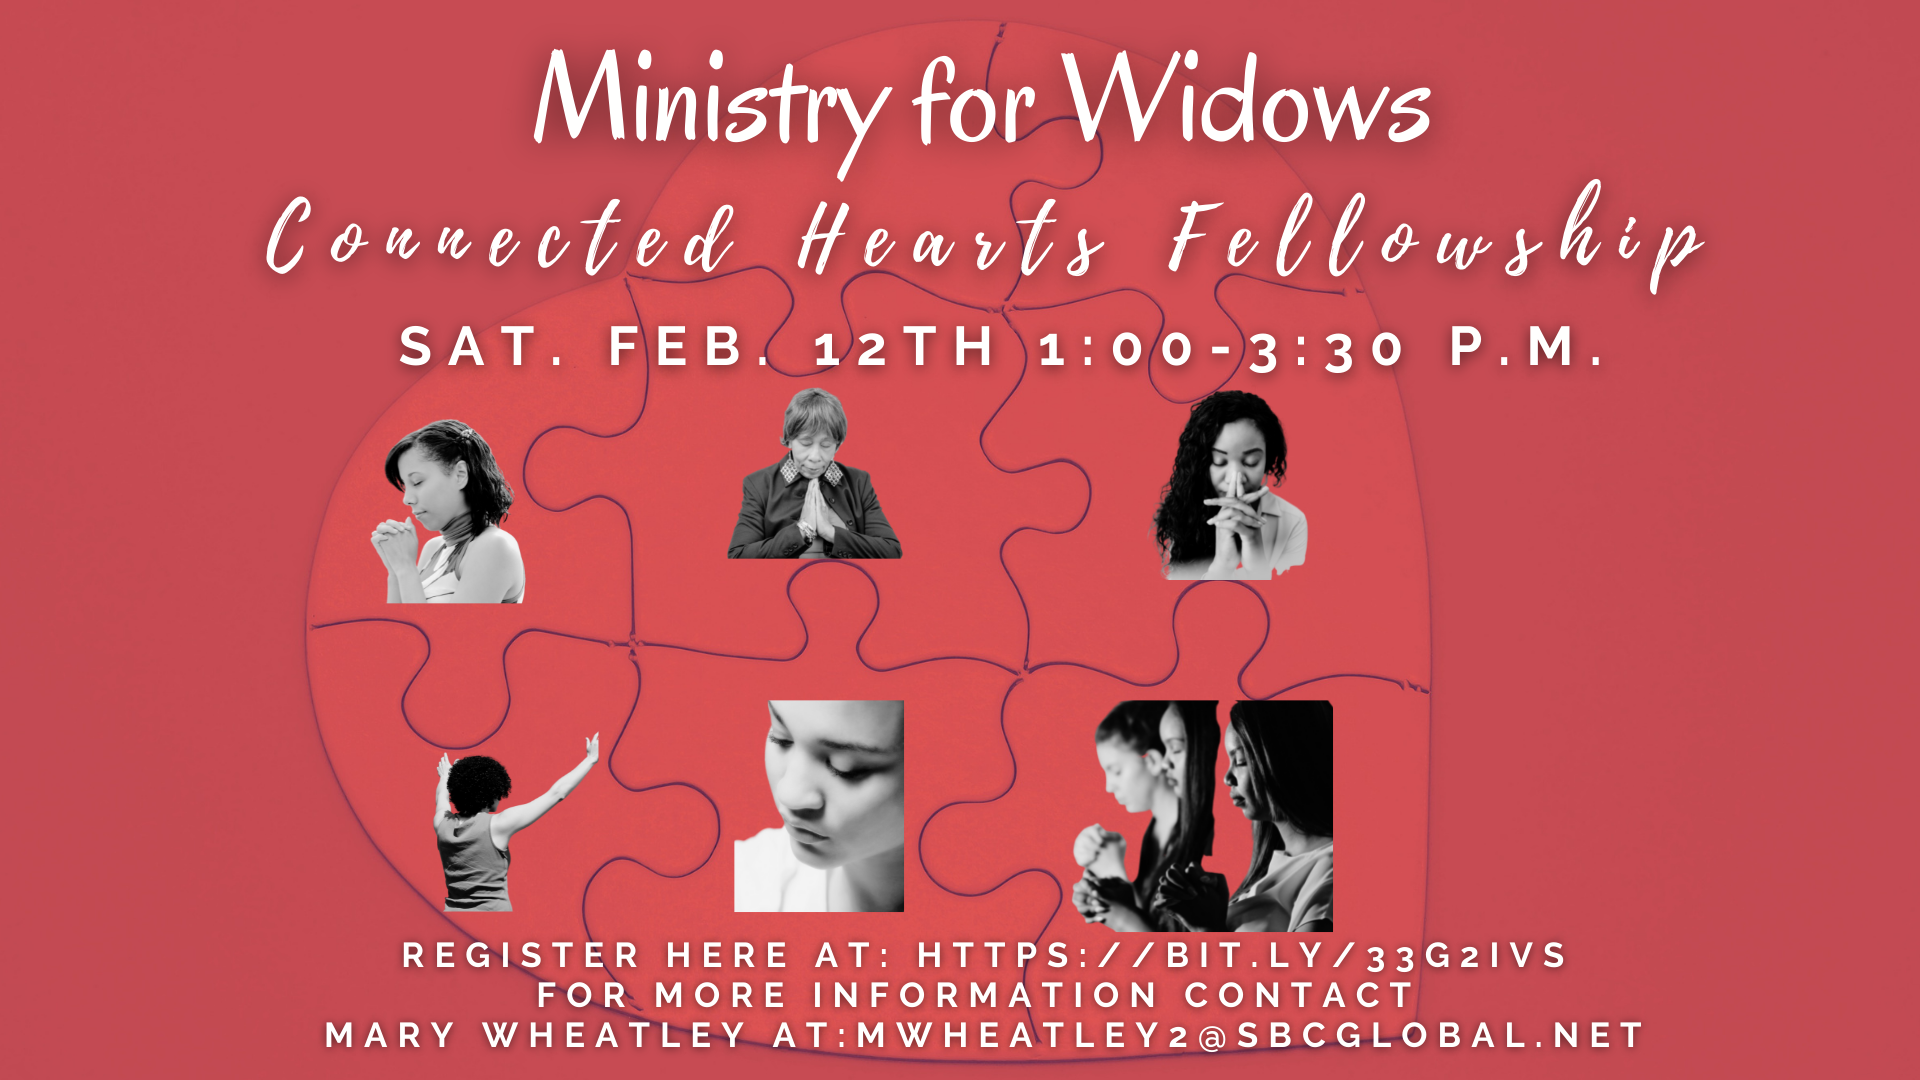 Widows Ministry Connected Hearts Fellowship head image